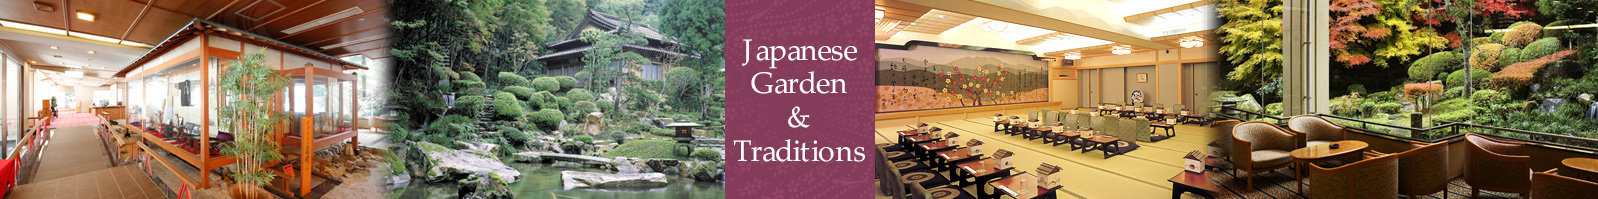 JAPANESE GARDEN & TRADITIONS